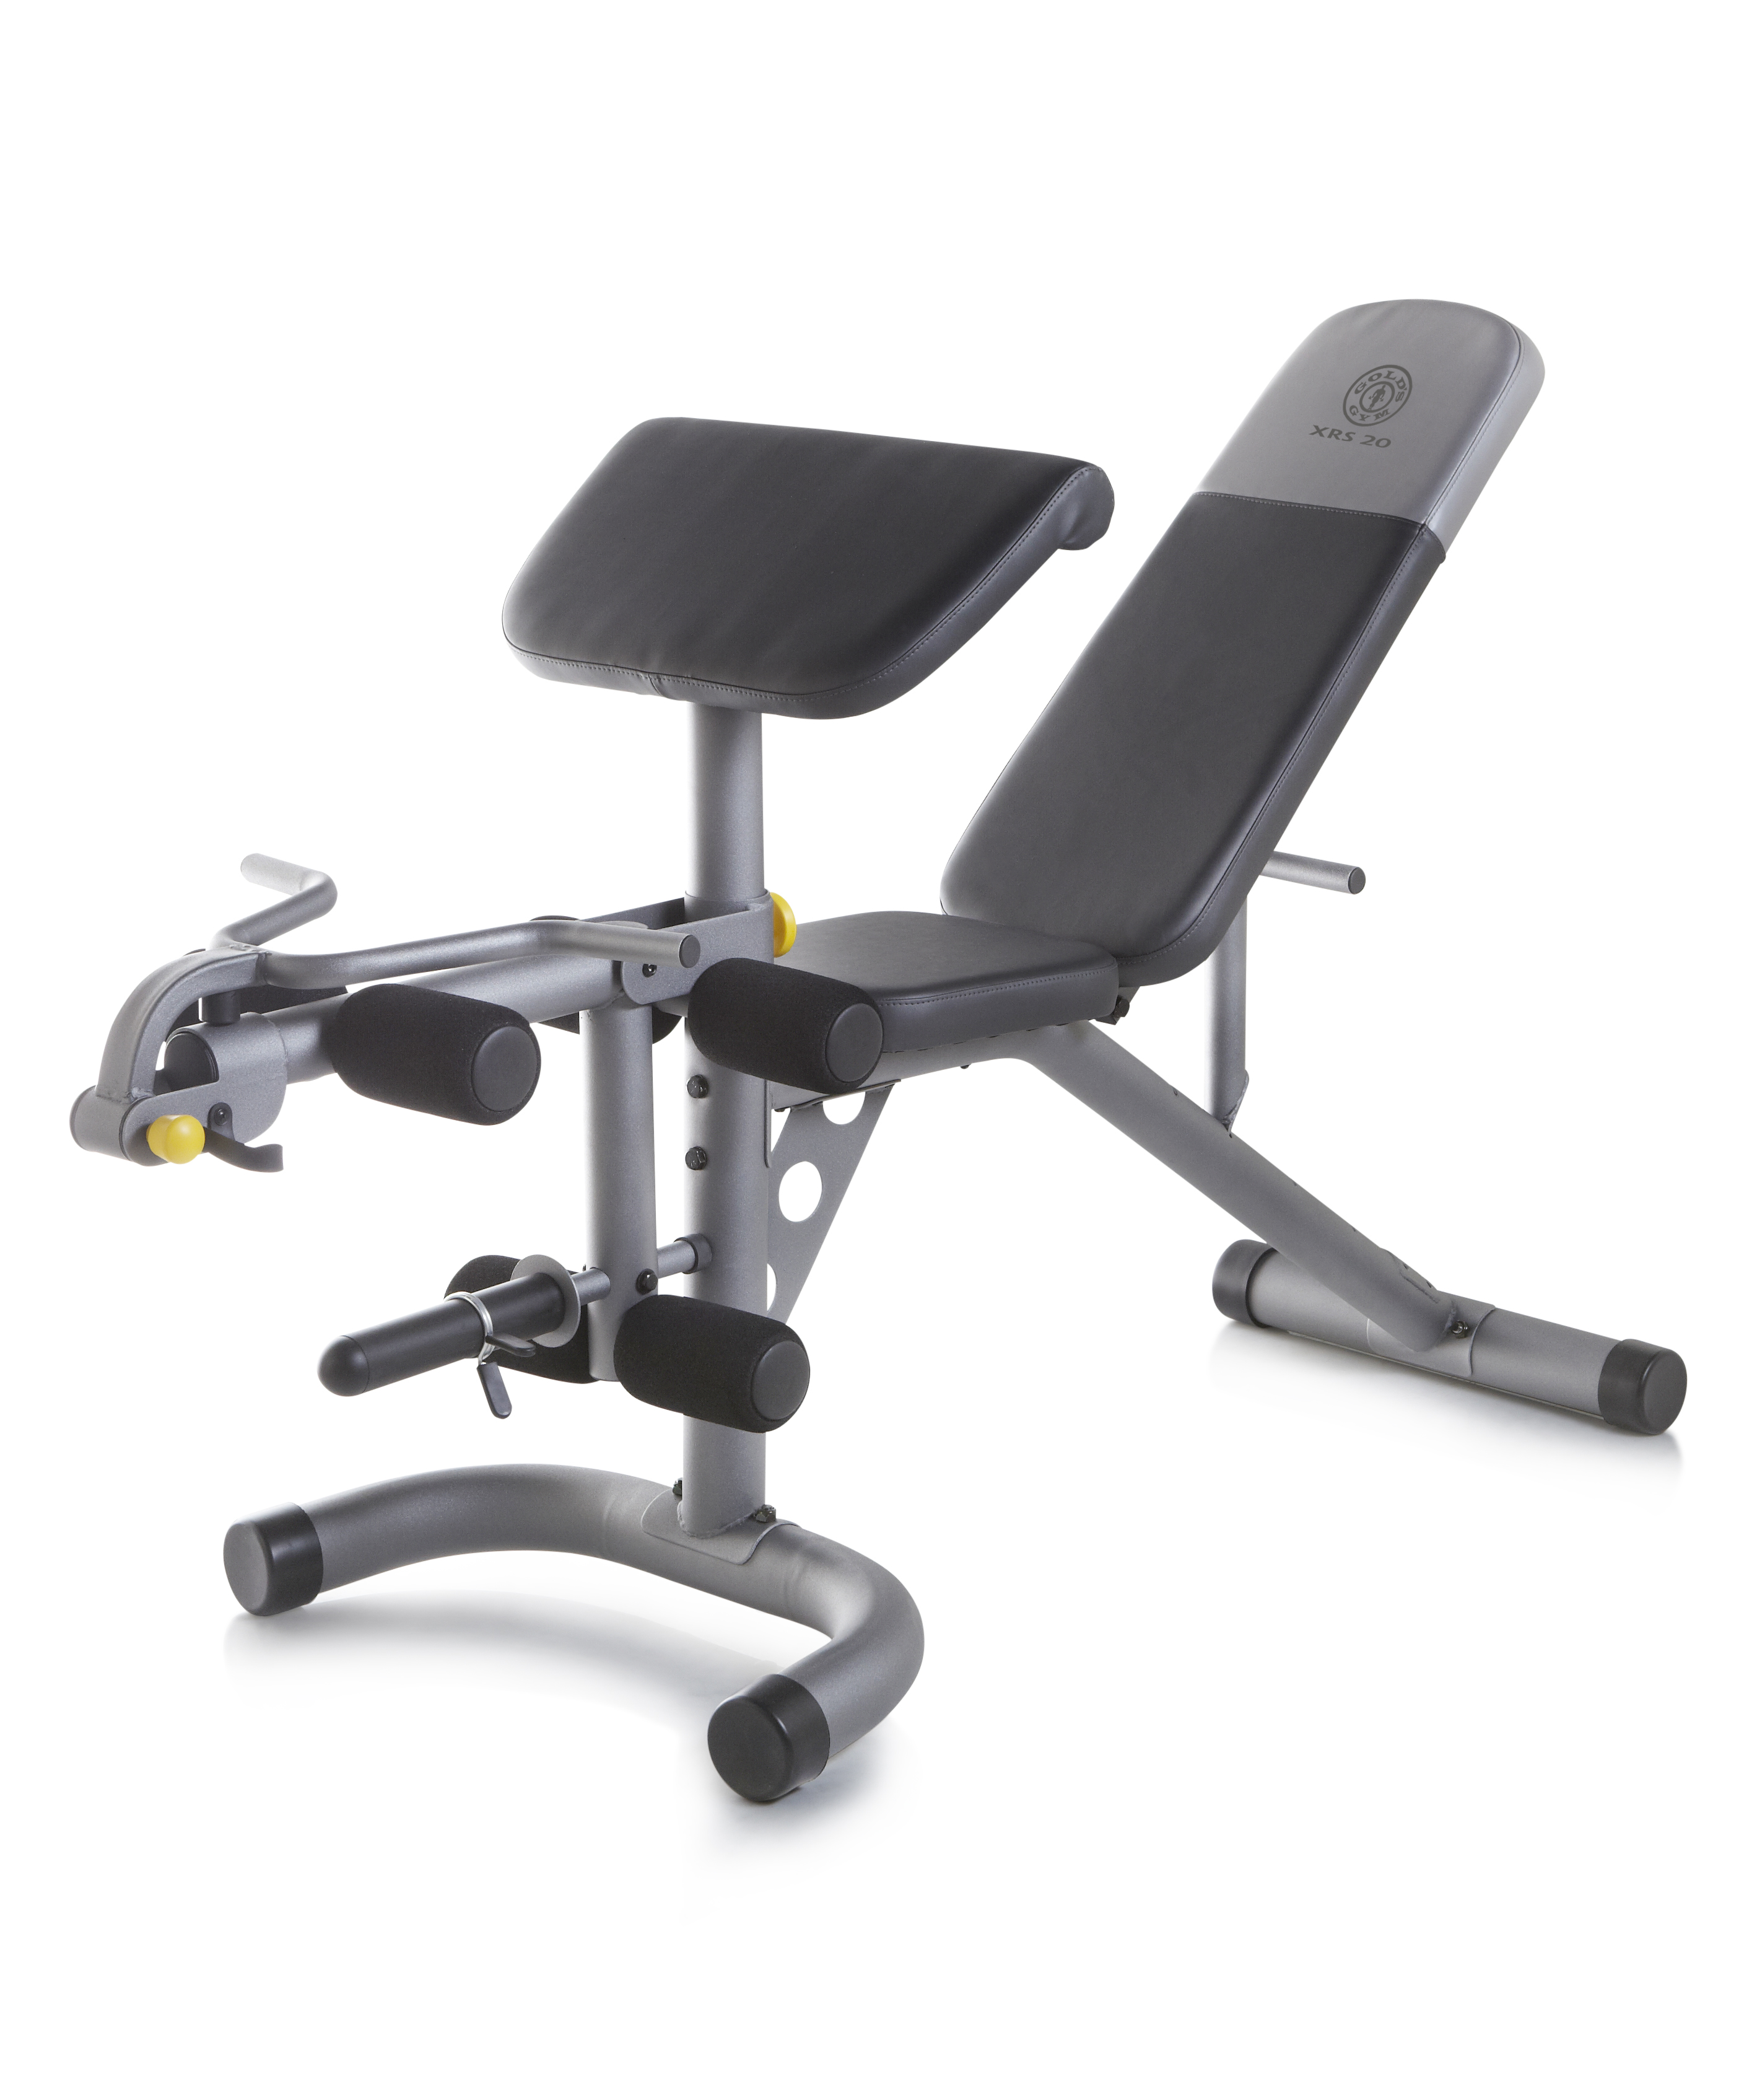 Gold's Gym XRS 20 Olympic Workout Bench with Removable Preacher Pad - image 1 of 7